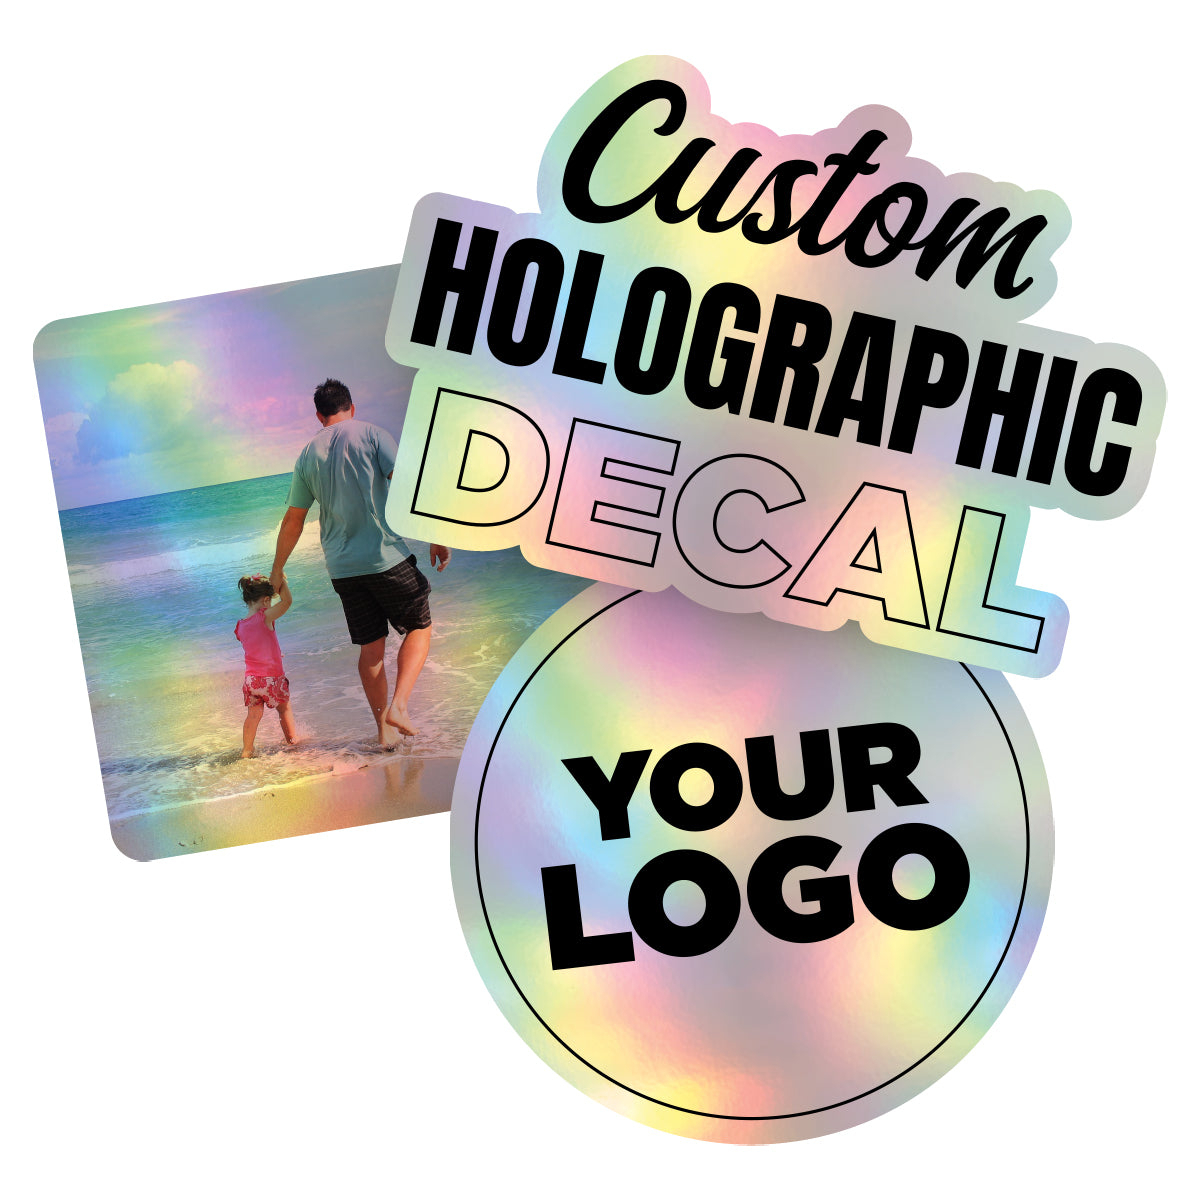 Personalized Holographic Vinyl Sticker Decal Custom Made Any Logo, Image, Text, Or Name Die Cut To Shape - 50 Pack, 6 Inch, Square